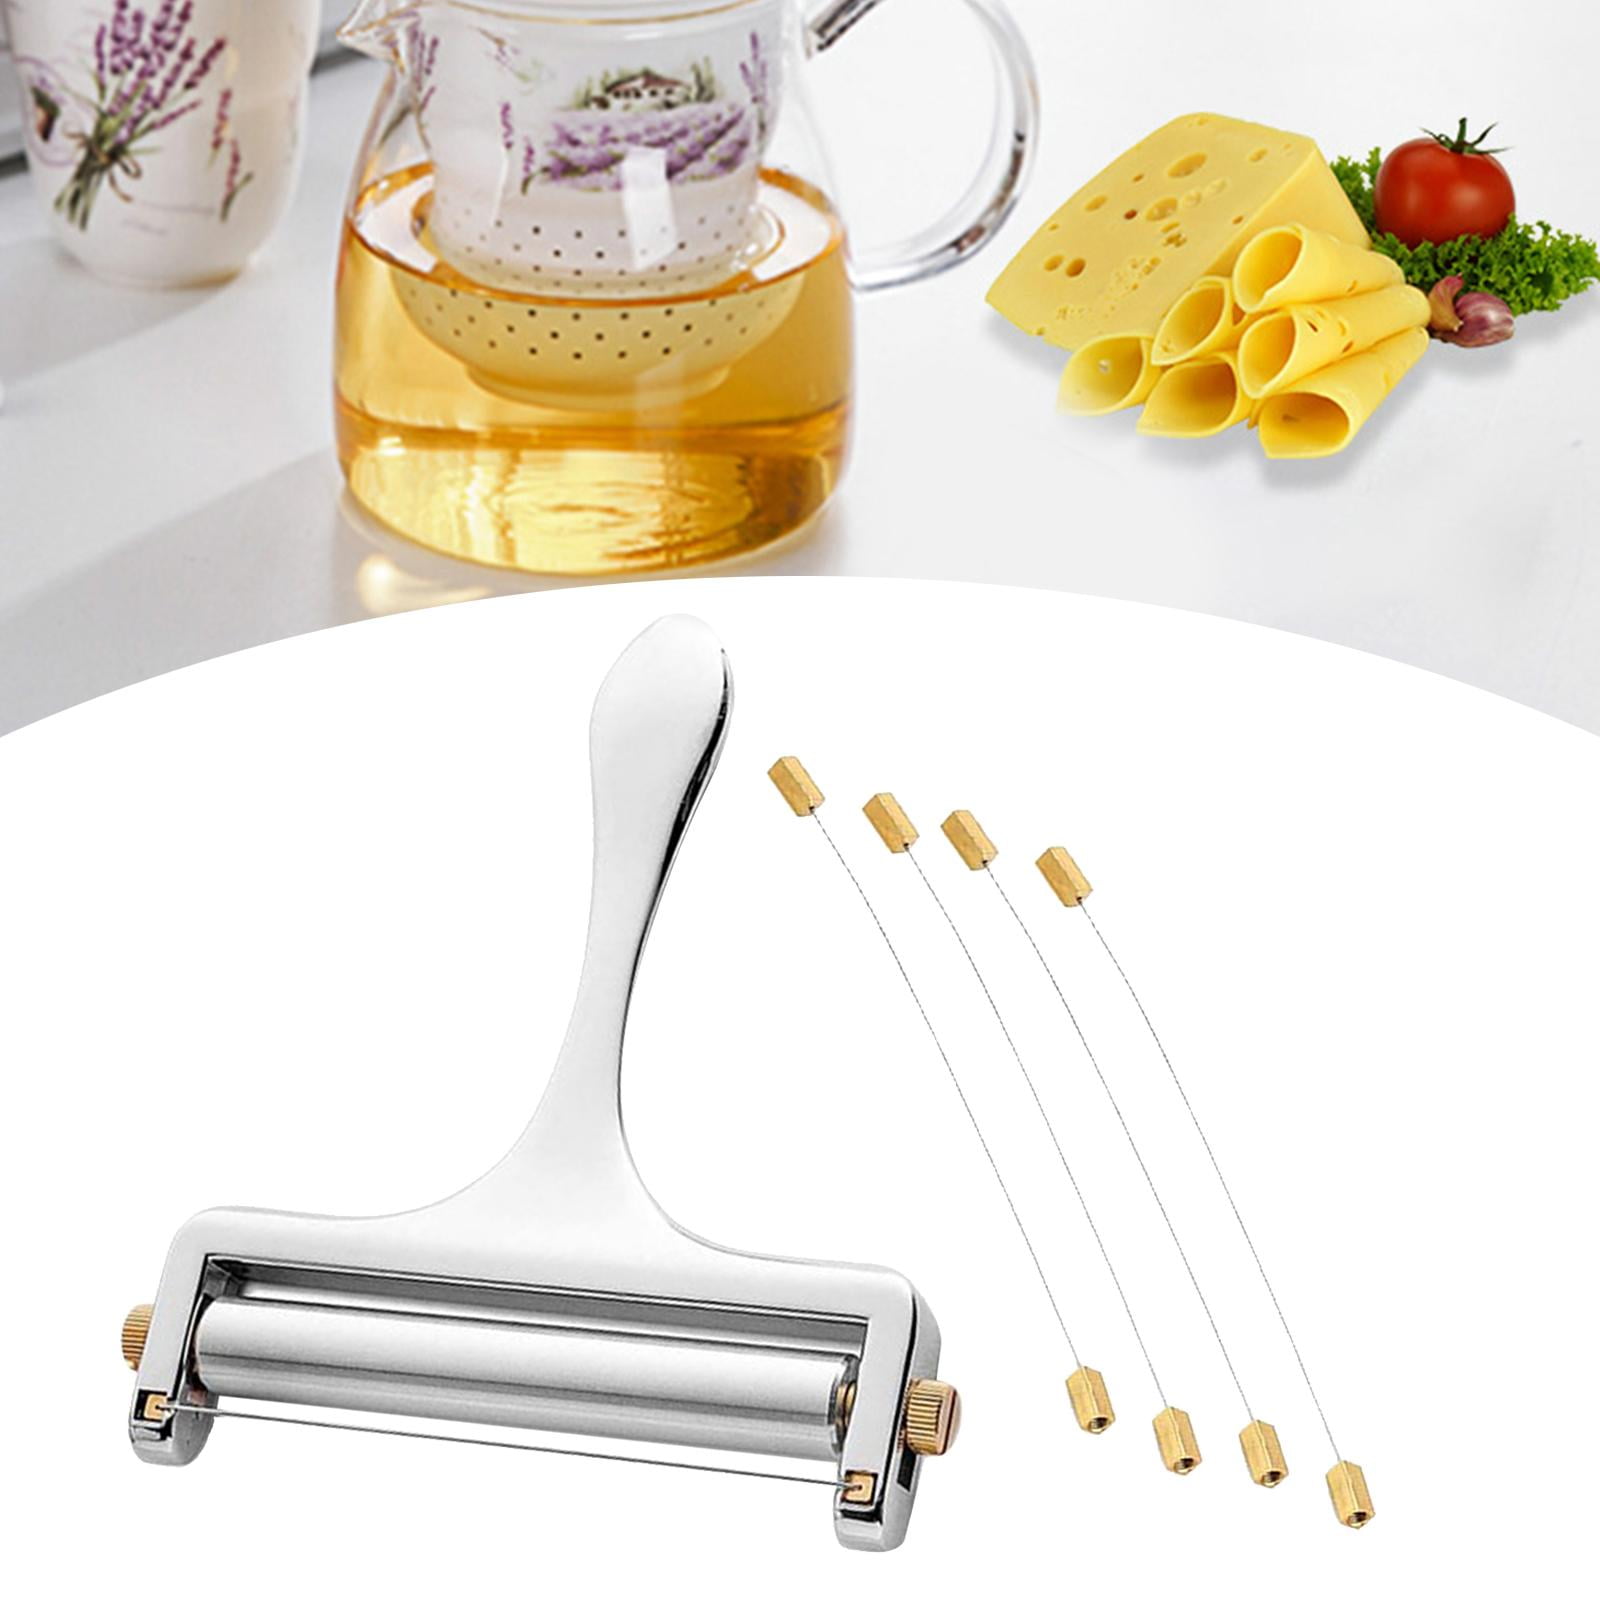 TABELTON Cheese Slicer with Wire for Block Cheese - Adjustable Cheese Cutter Board with 4 Replacement Wires - Stainless Steel Precise Scale for Clear